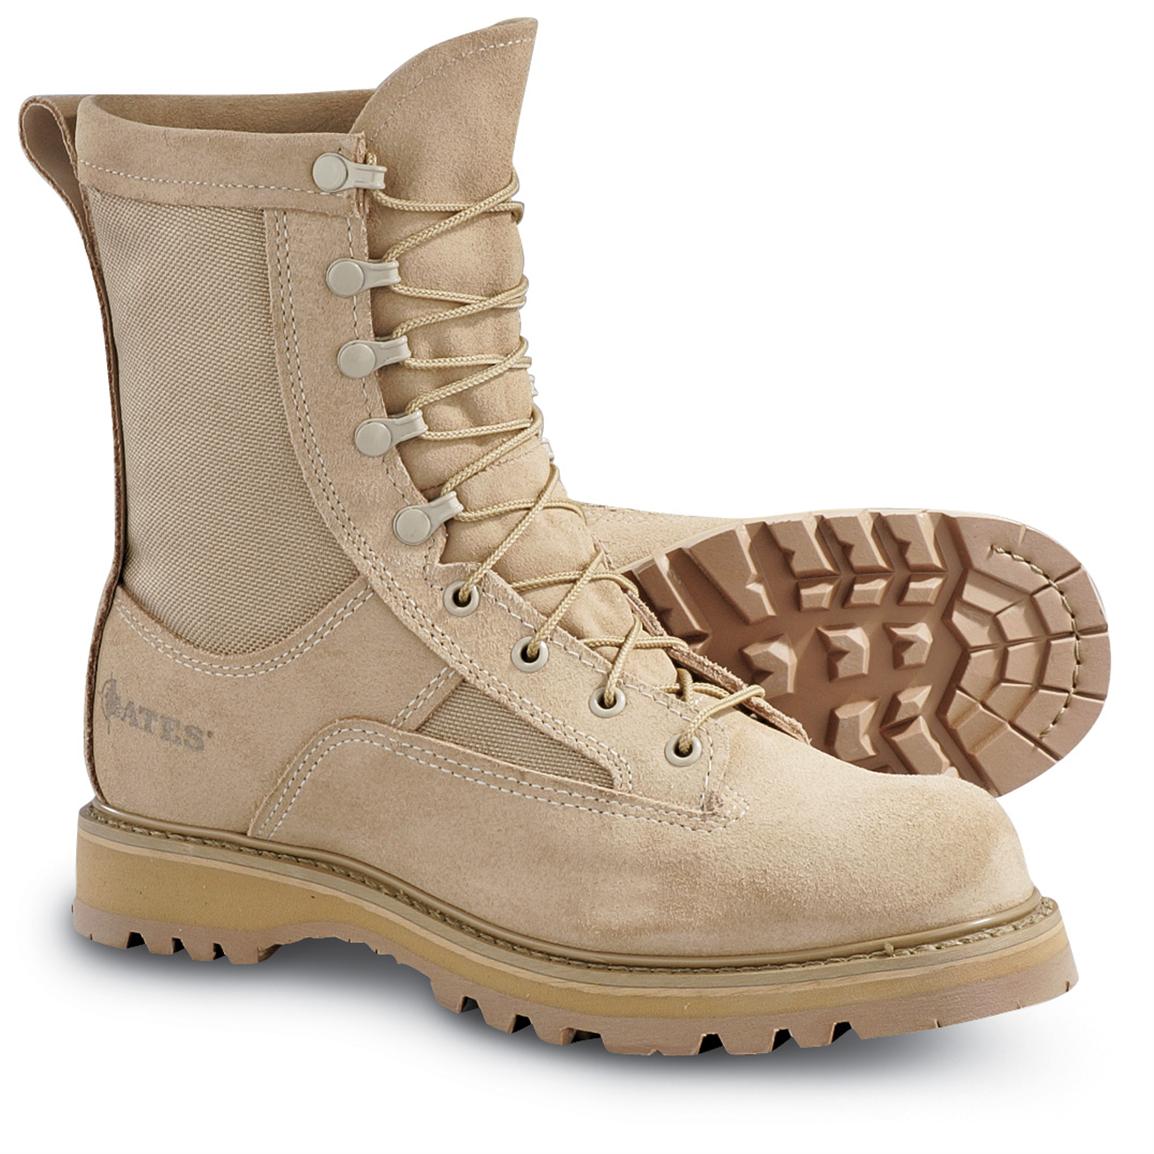 Bates Army Boots - Army Military